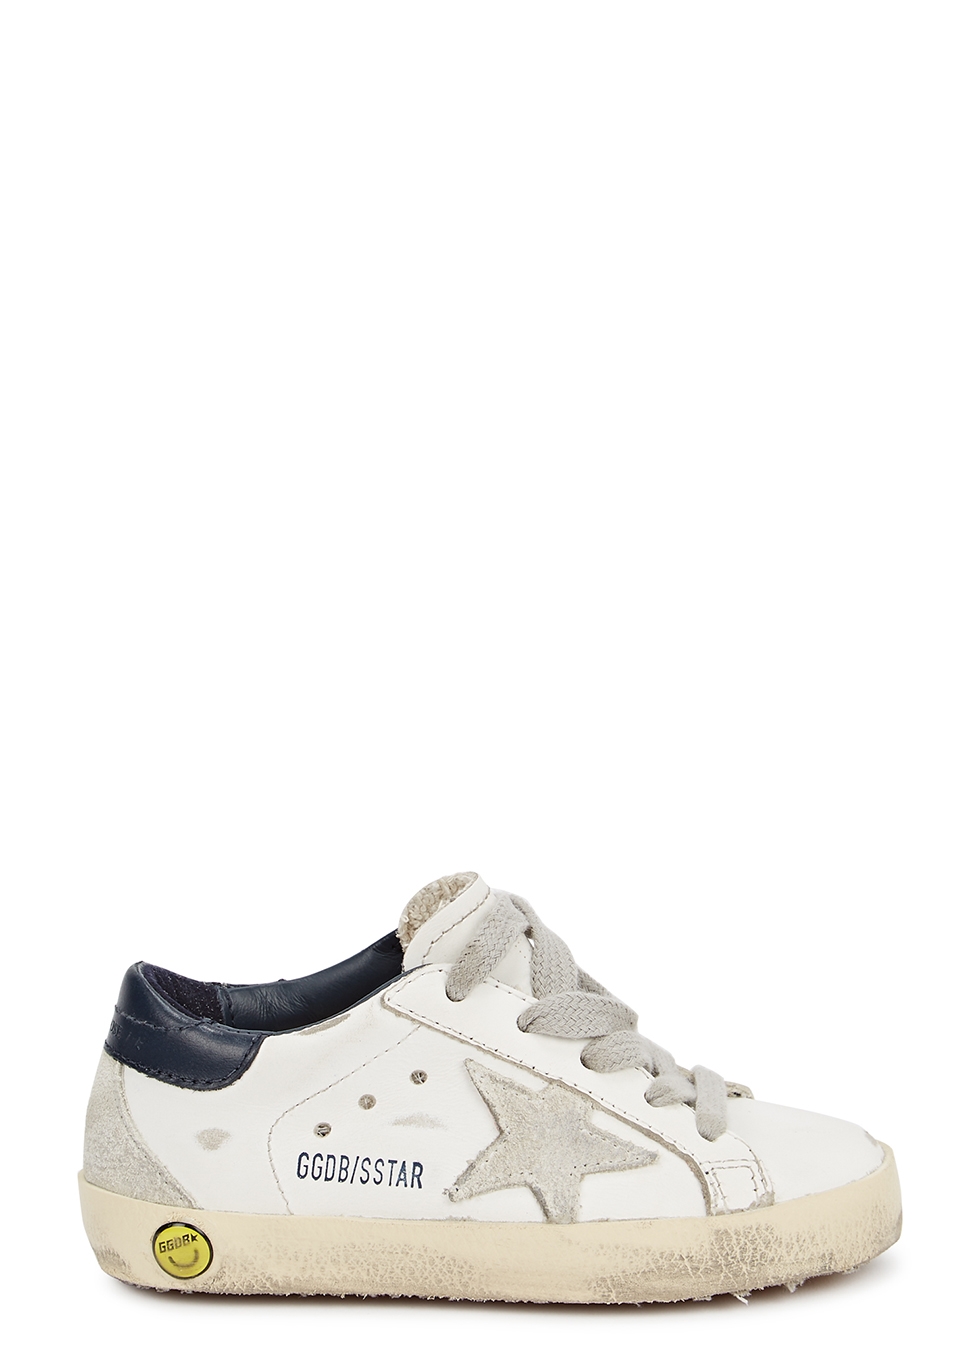 KIDS Superstar white leather sneakers (IT19-IT27)